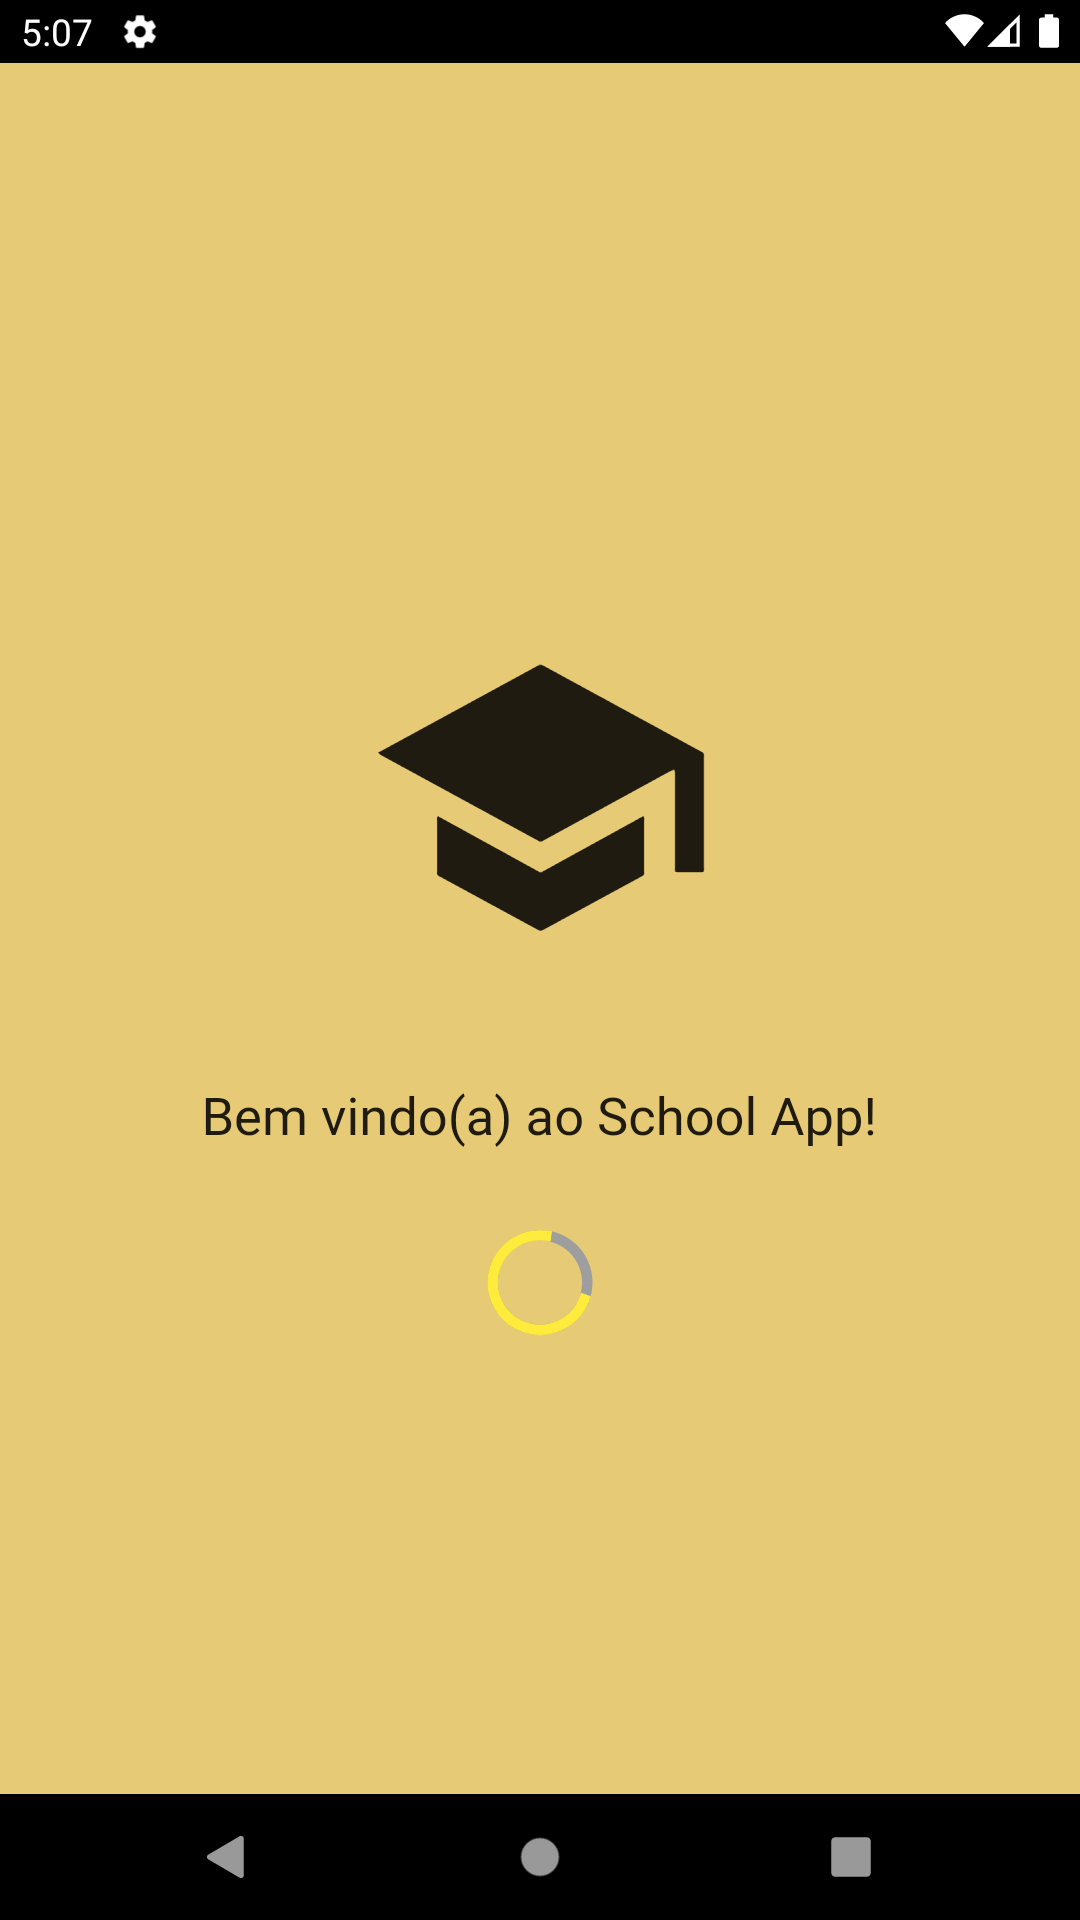 A Mobile Application for a school that was developed using Flutter SDK